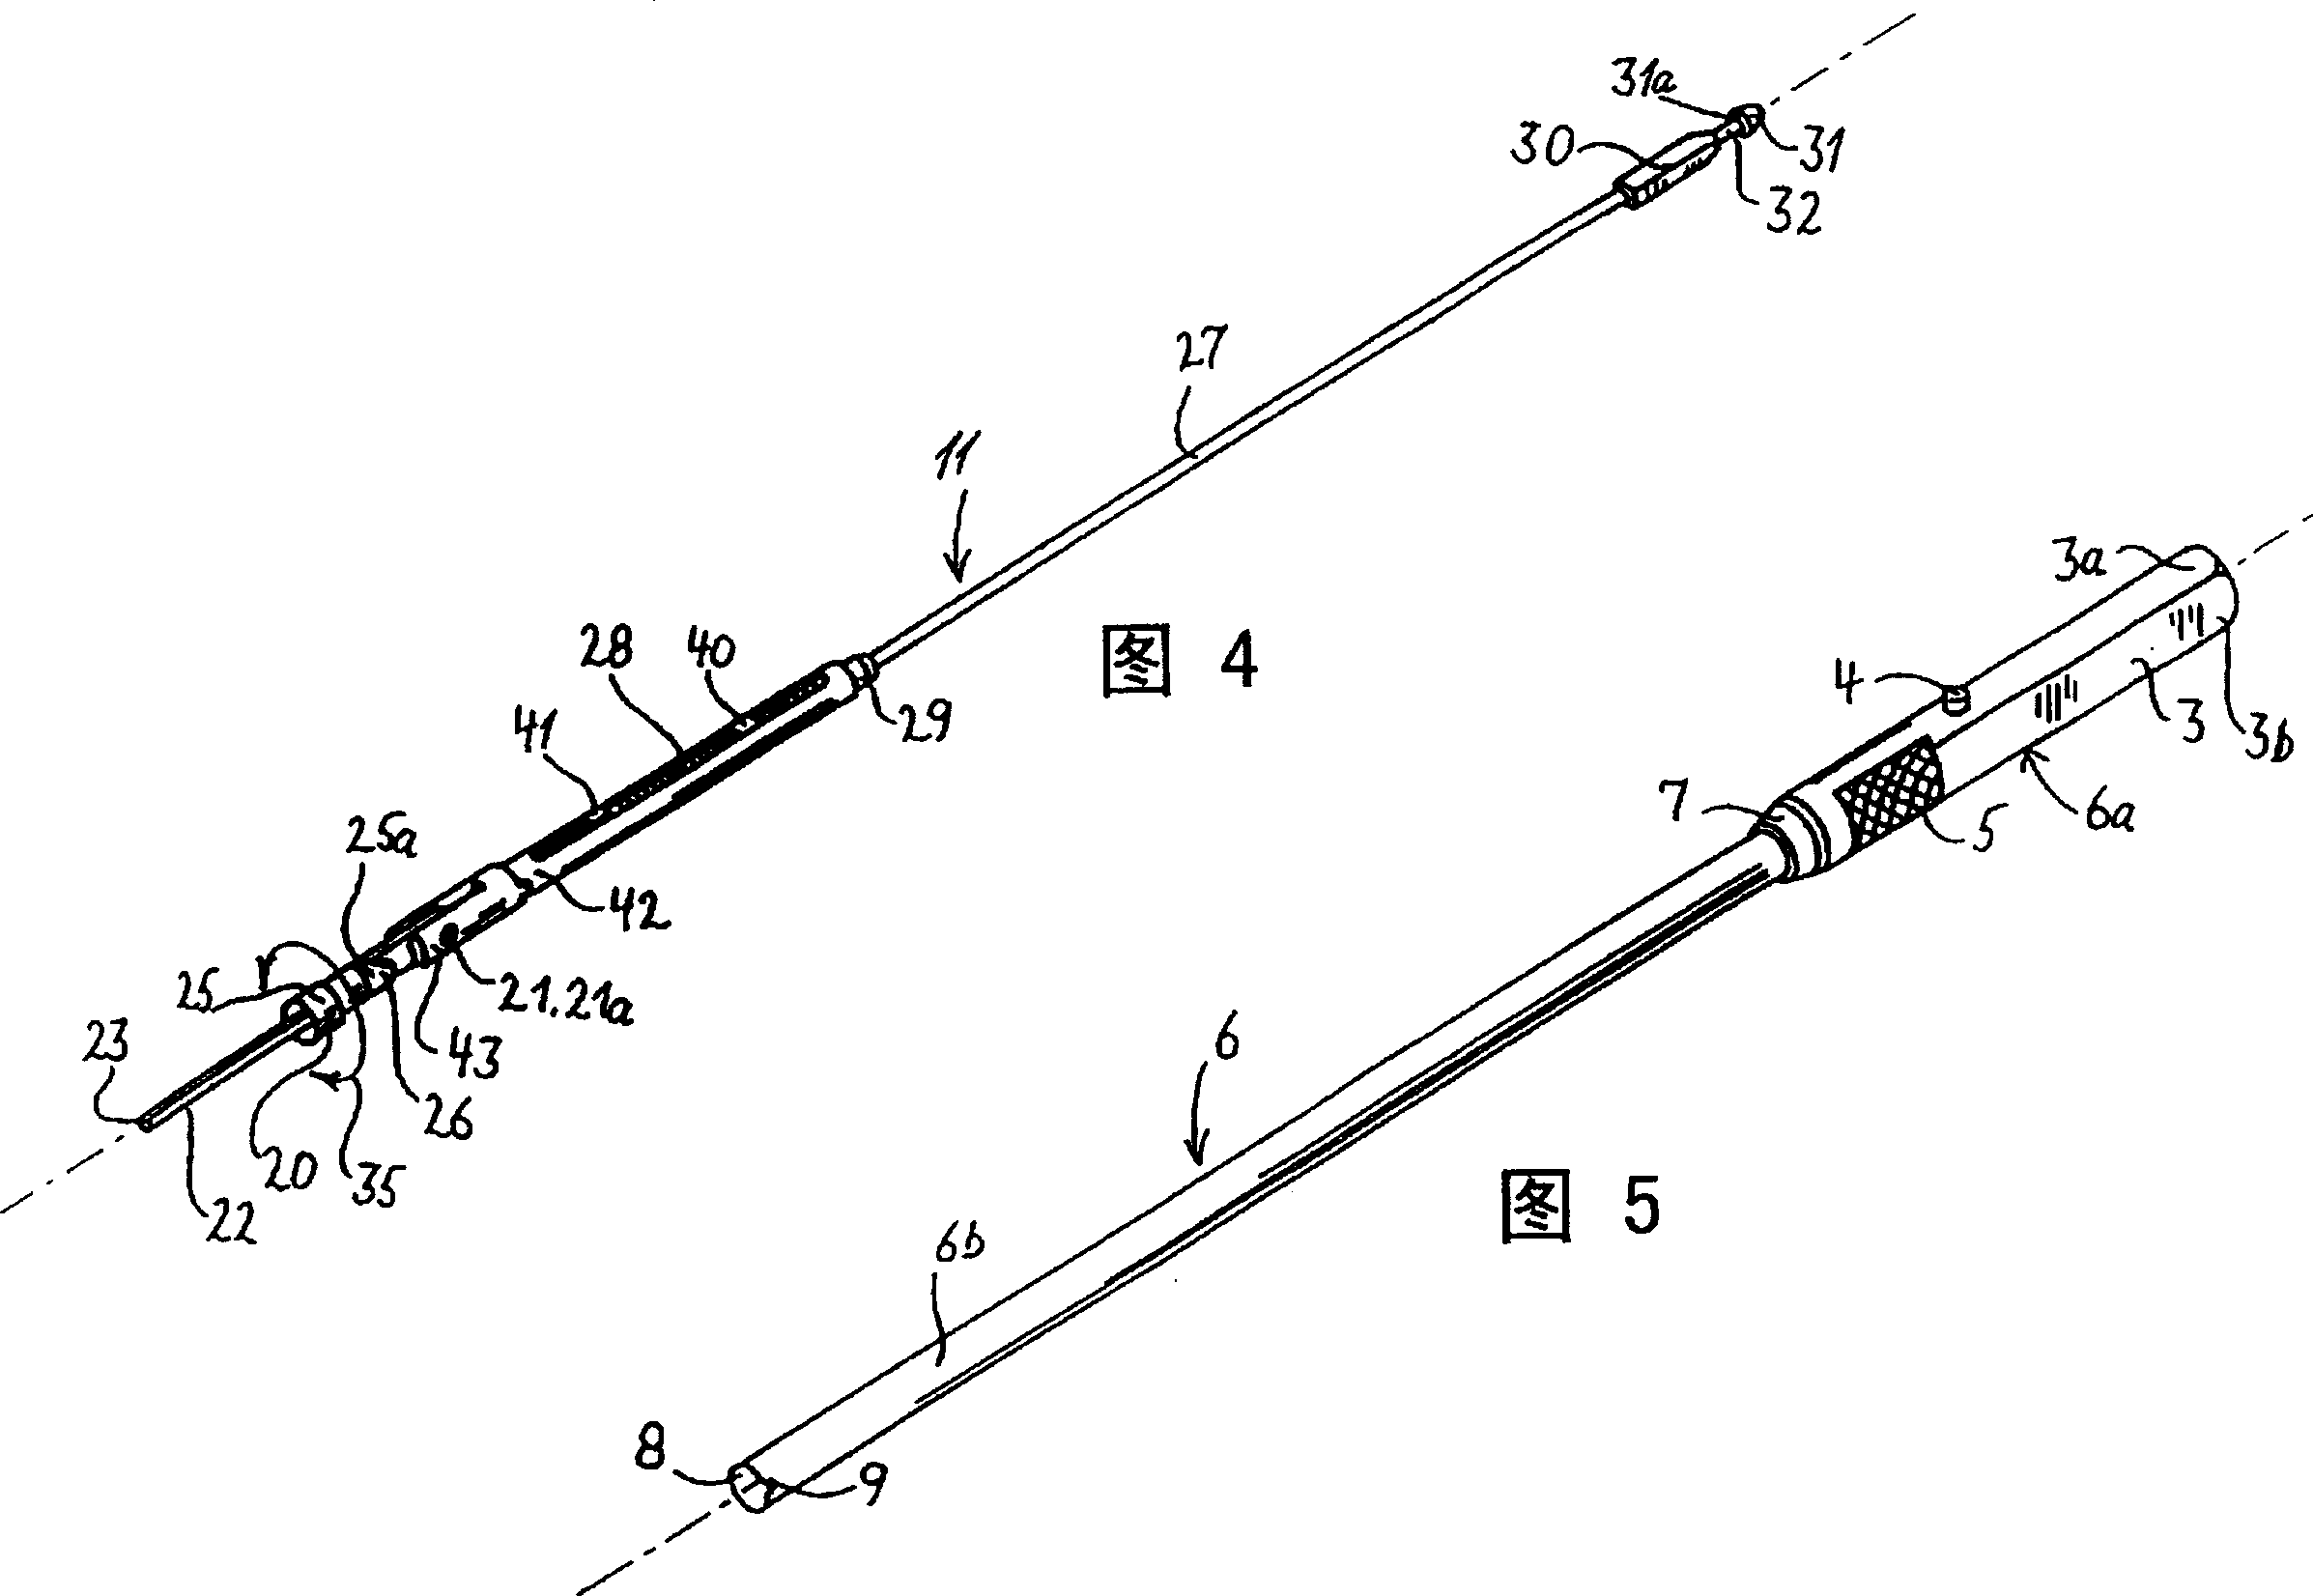 Instrument for apptication of surgieal material